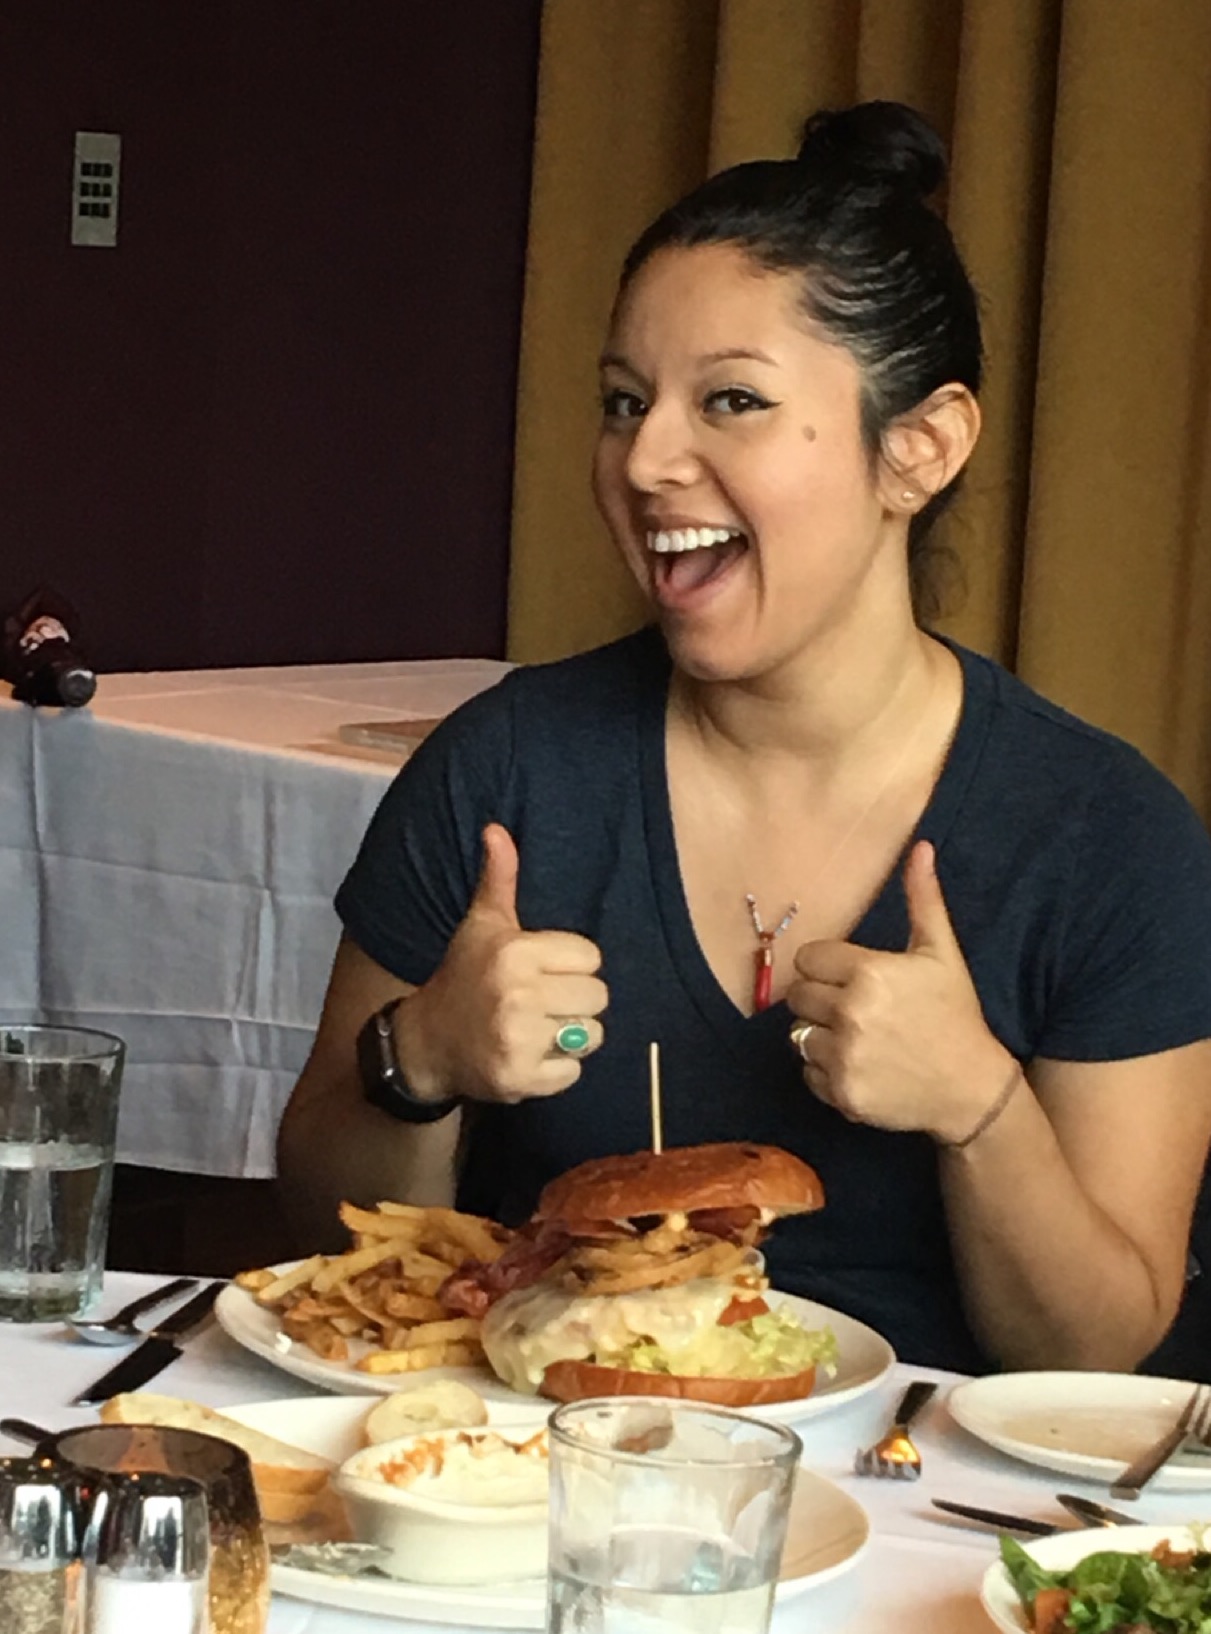 Student Catalina Duarte gives a thumbs up at the League for Innovation luncheon.